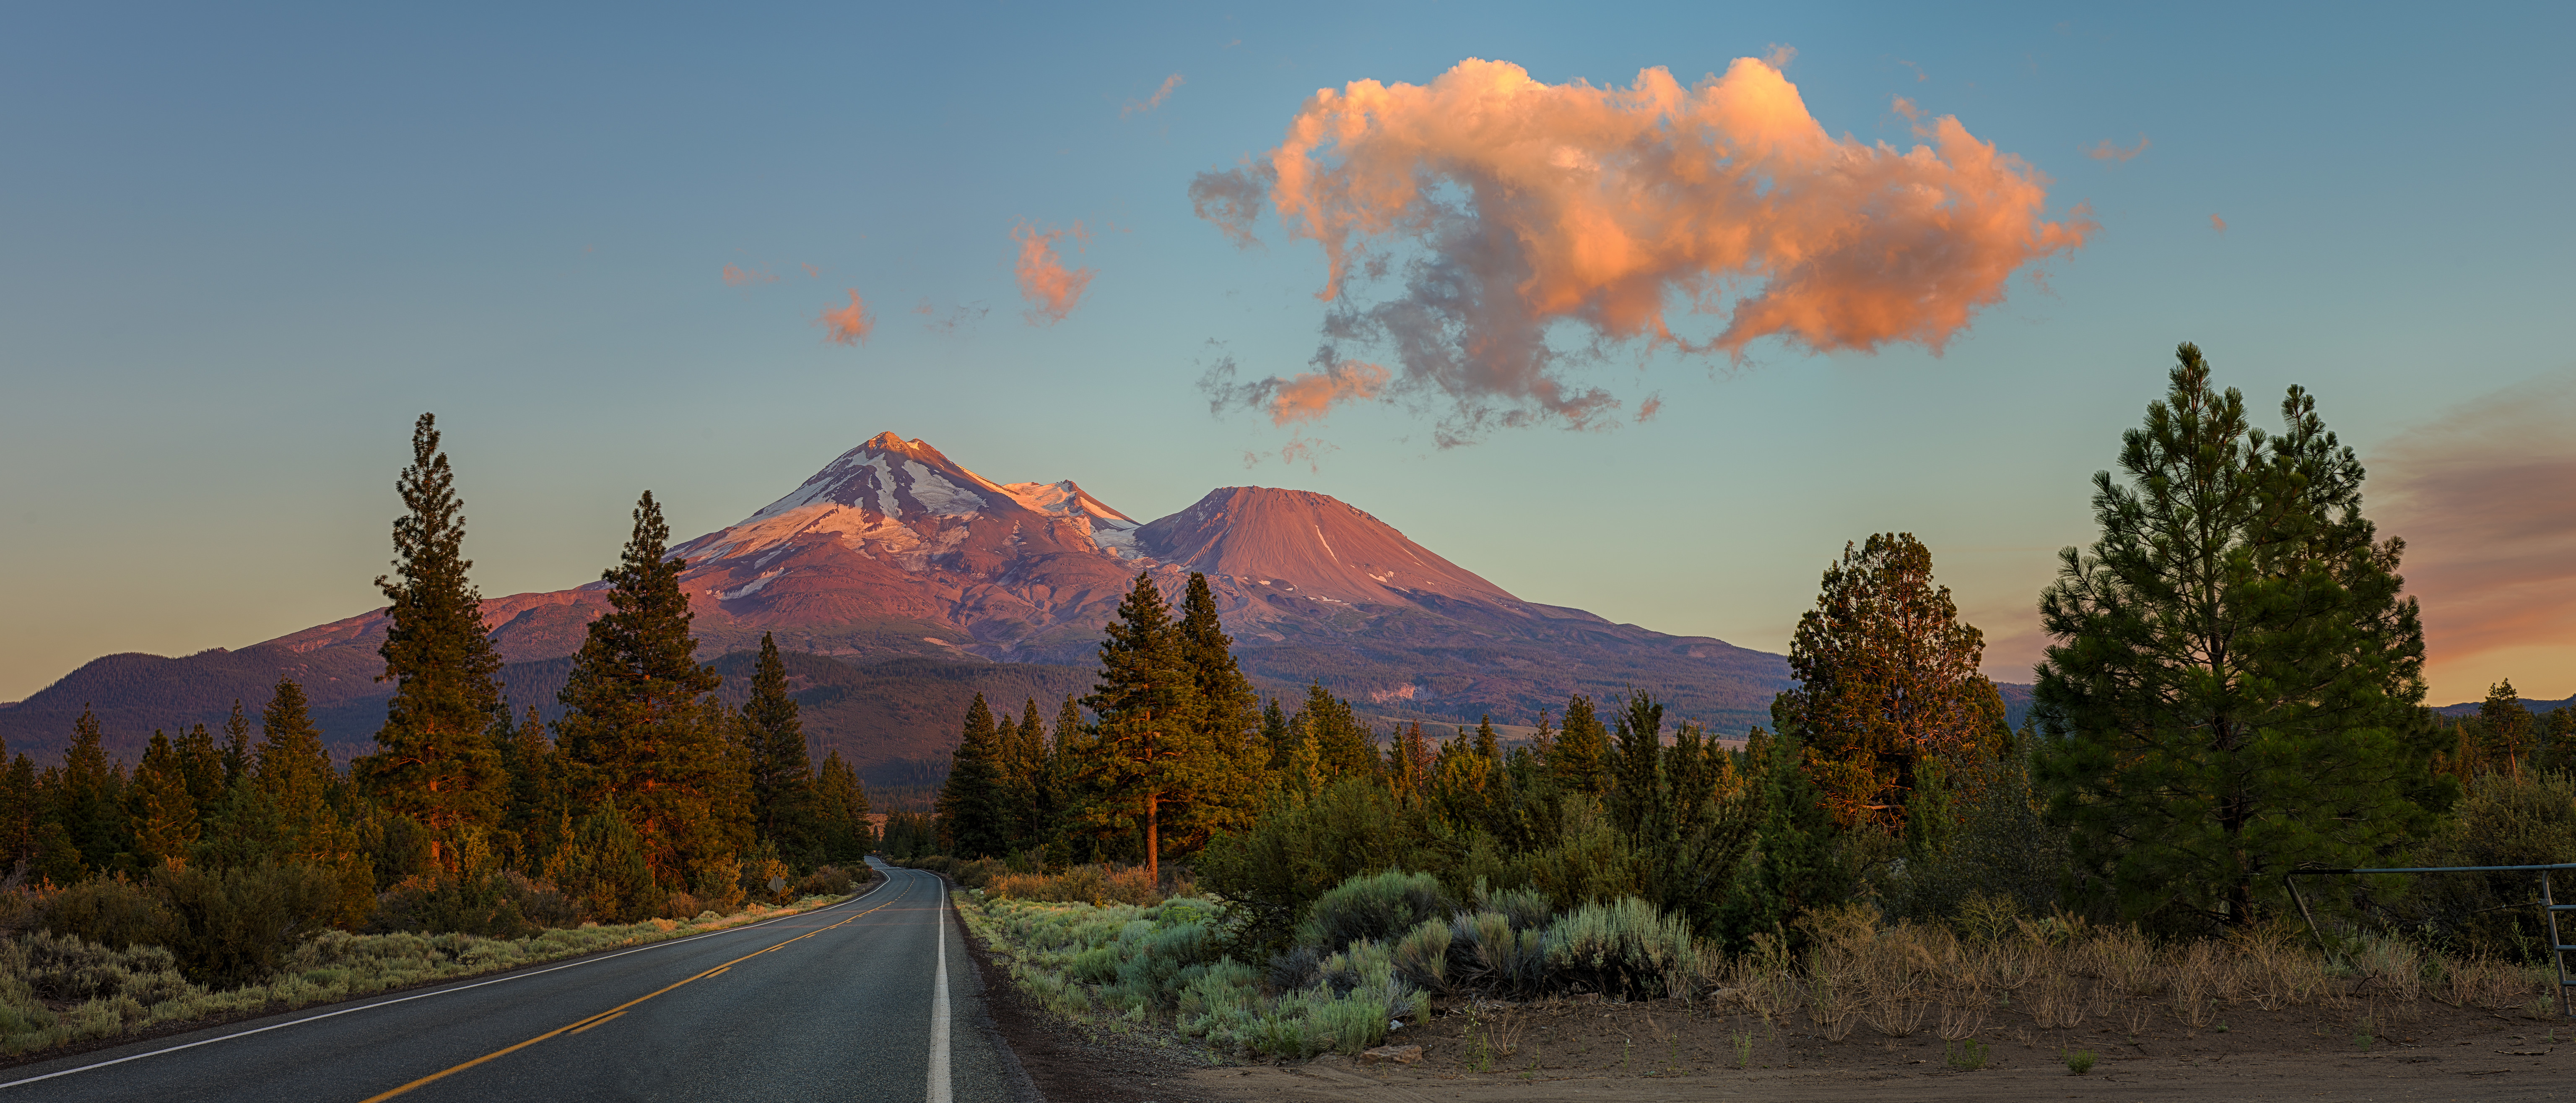 General 6144x2630 Mount Shasta California photography landscape sunset pine trees clouds sunset glow mountains snowy peak sunlight snow sky road trees ultrawide